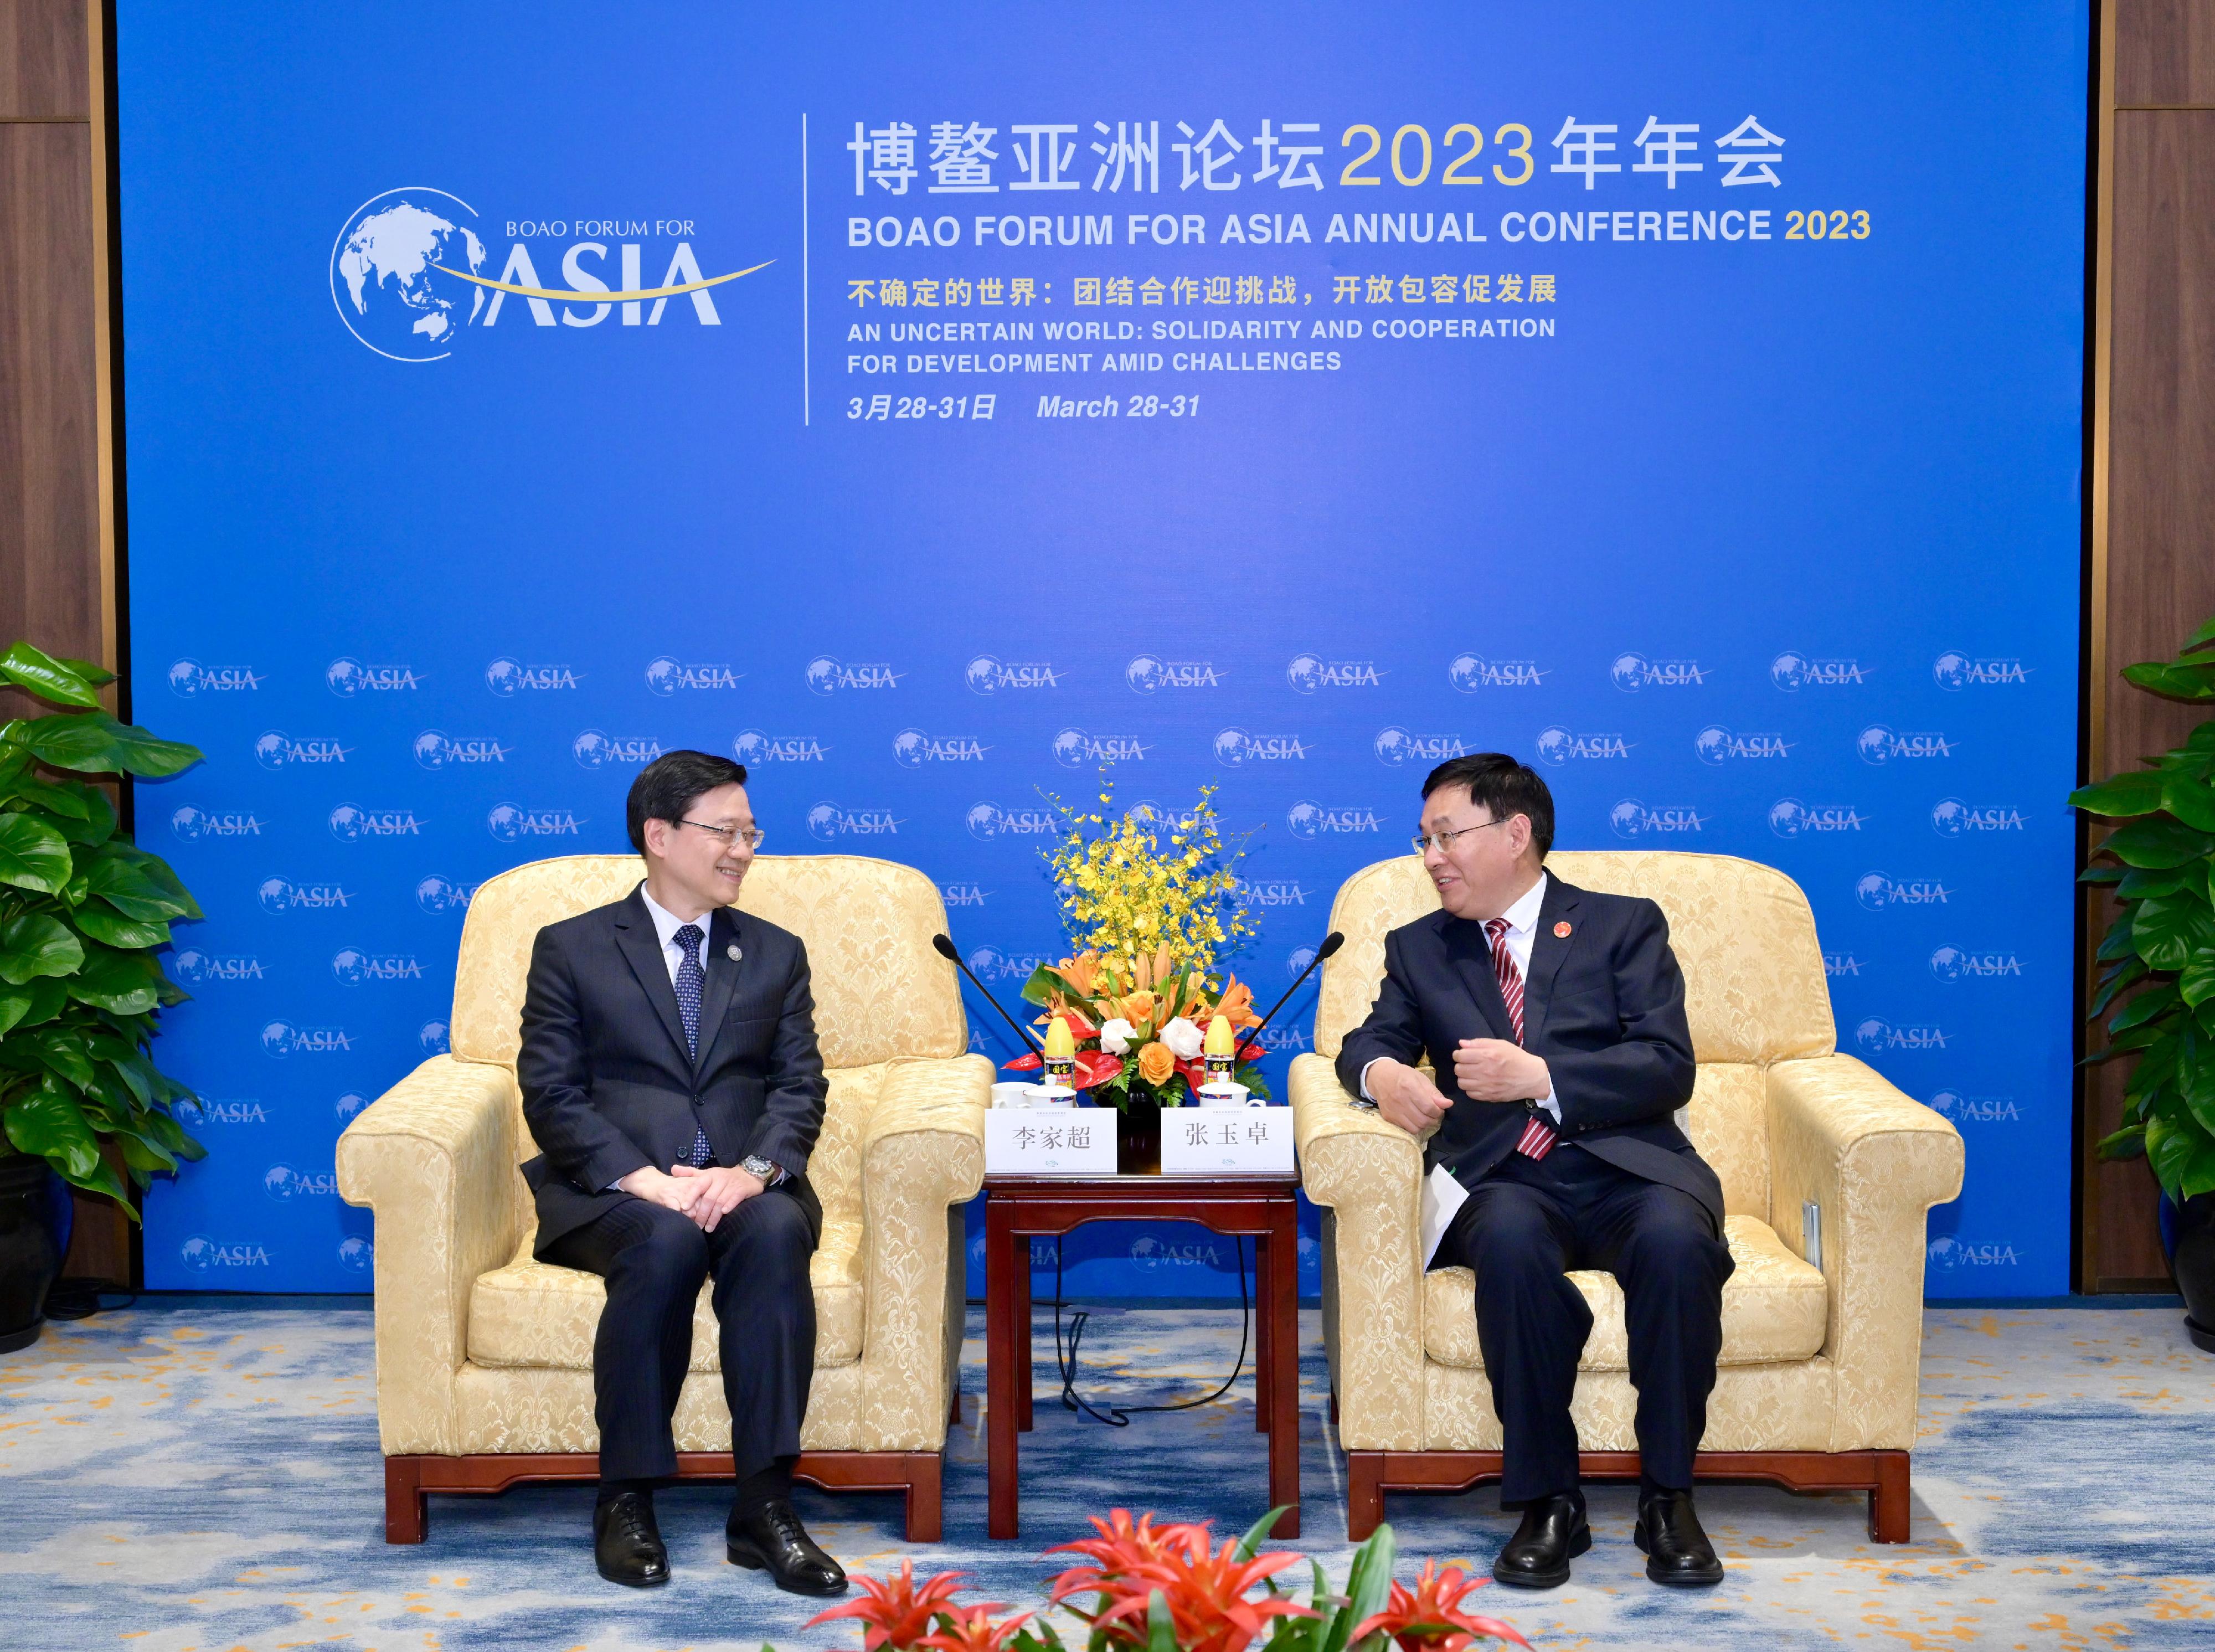 The Chief Executive, Mr John Lee (left), meets with the Chairman of the State-owned Assets Supervision and Administration Commission of the State Council, Mr Zhang Yuzhuo (right), during the Boao Forum for Asia Annual Conference 2023 in Hainan today (March 30).